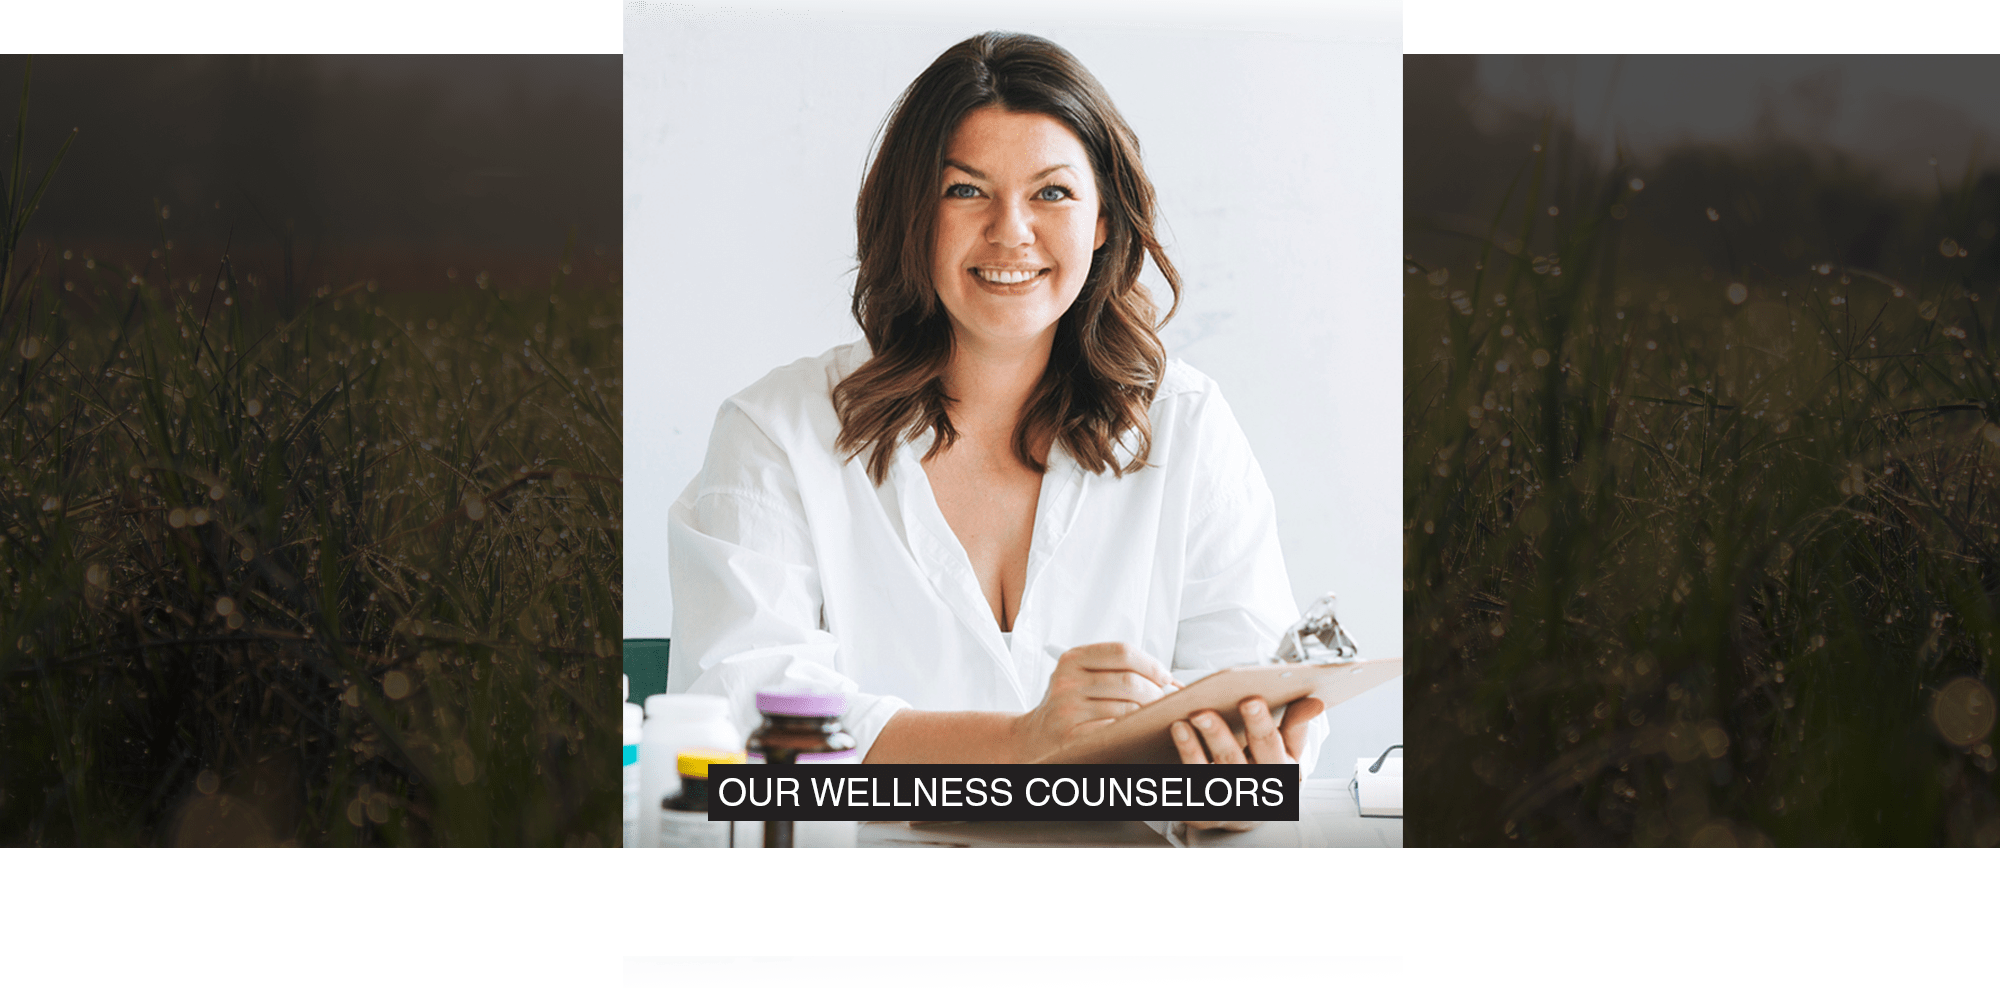 OUR WELLNESS COUNSELORS